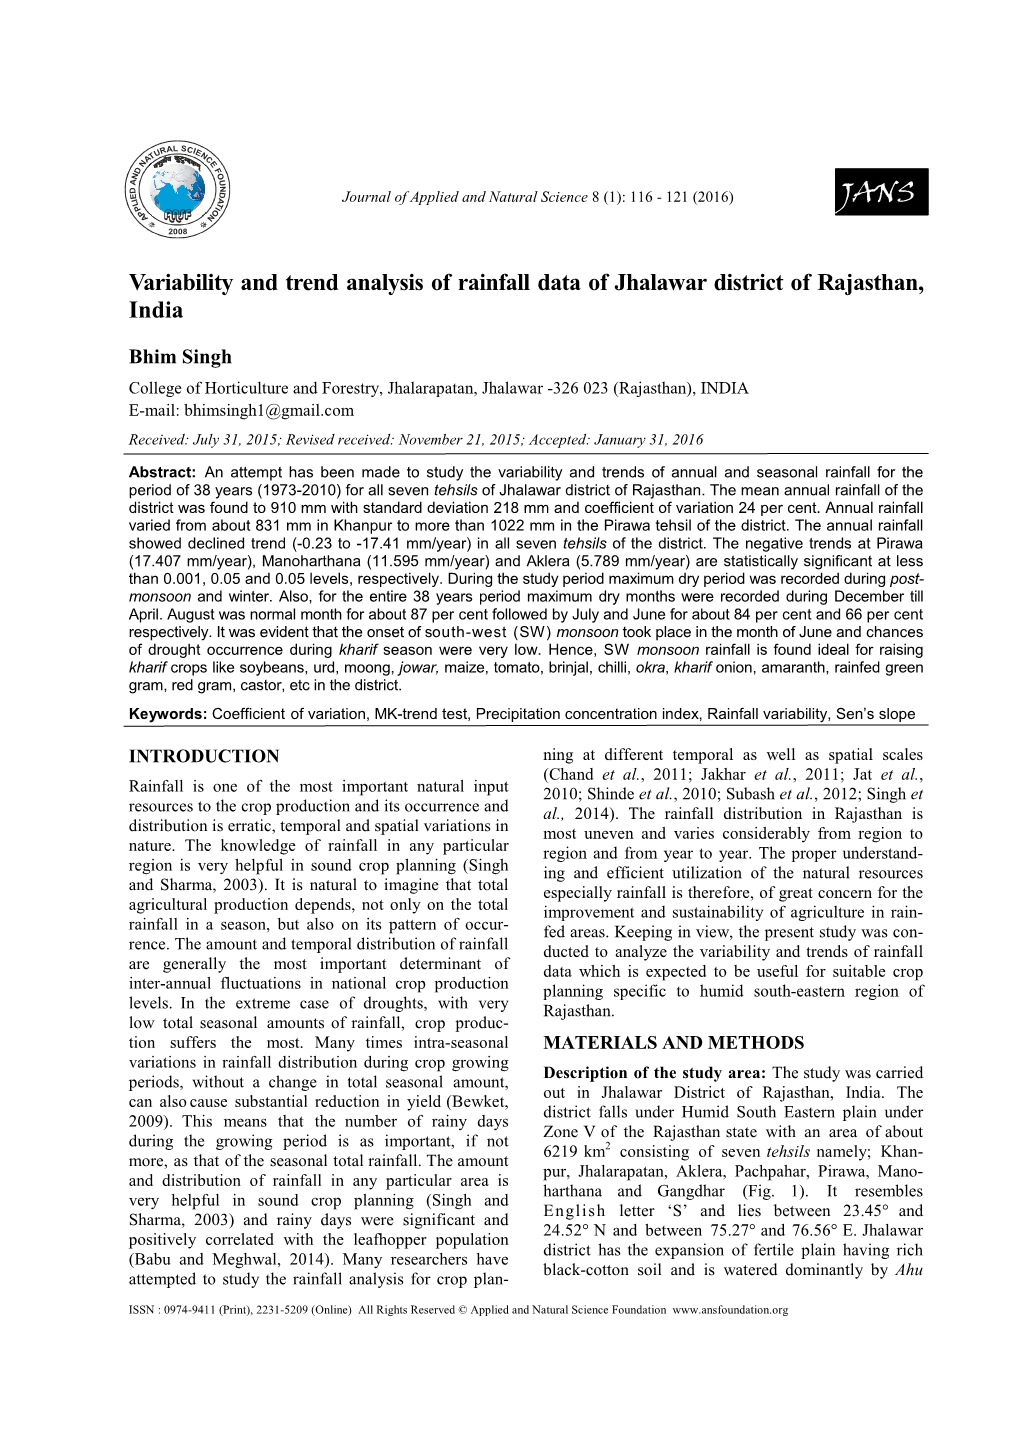 Variability and Trend Analysis of Rainfall Data of Jhalawar District of Rajasthan, India